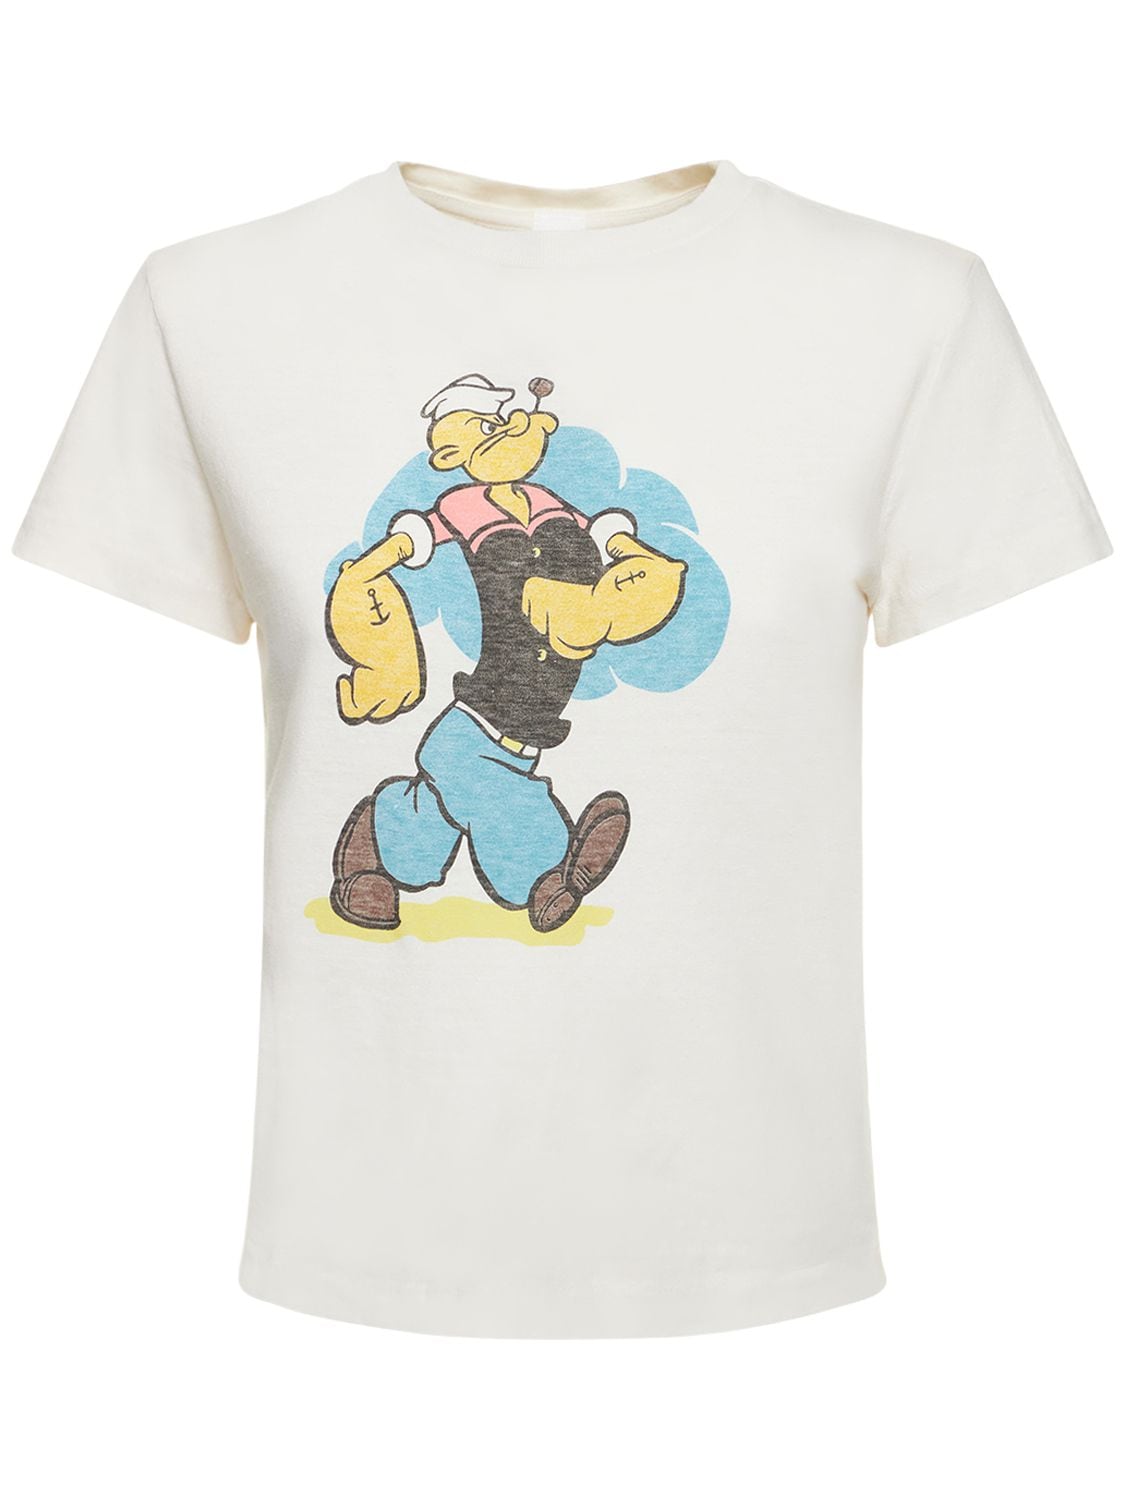 RE/DONE CLASSIC POPEYE COTTON JERSEY T-SHIRT